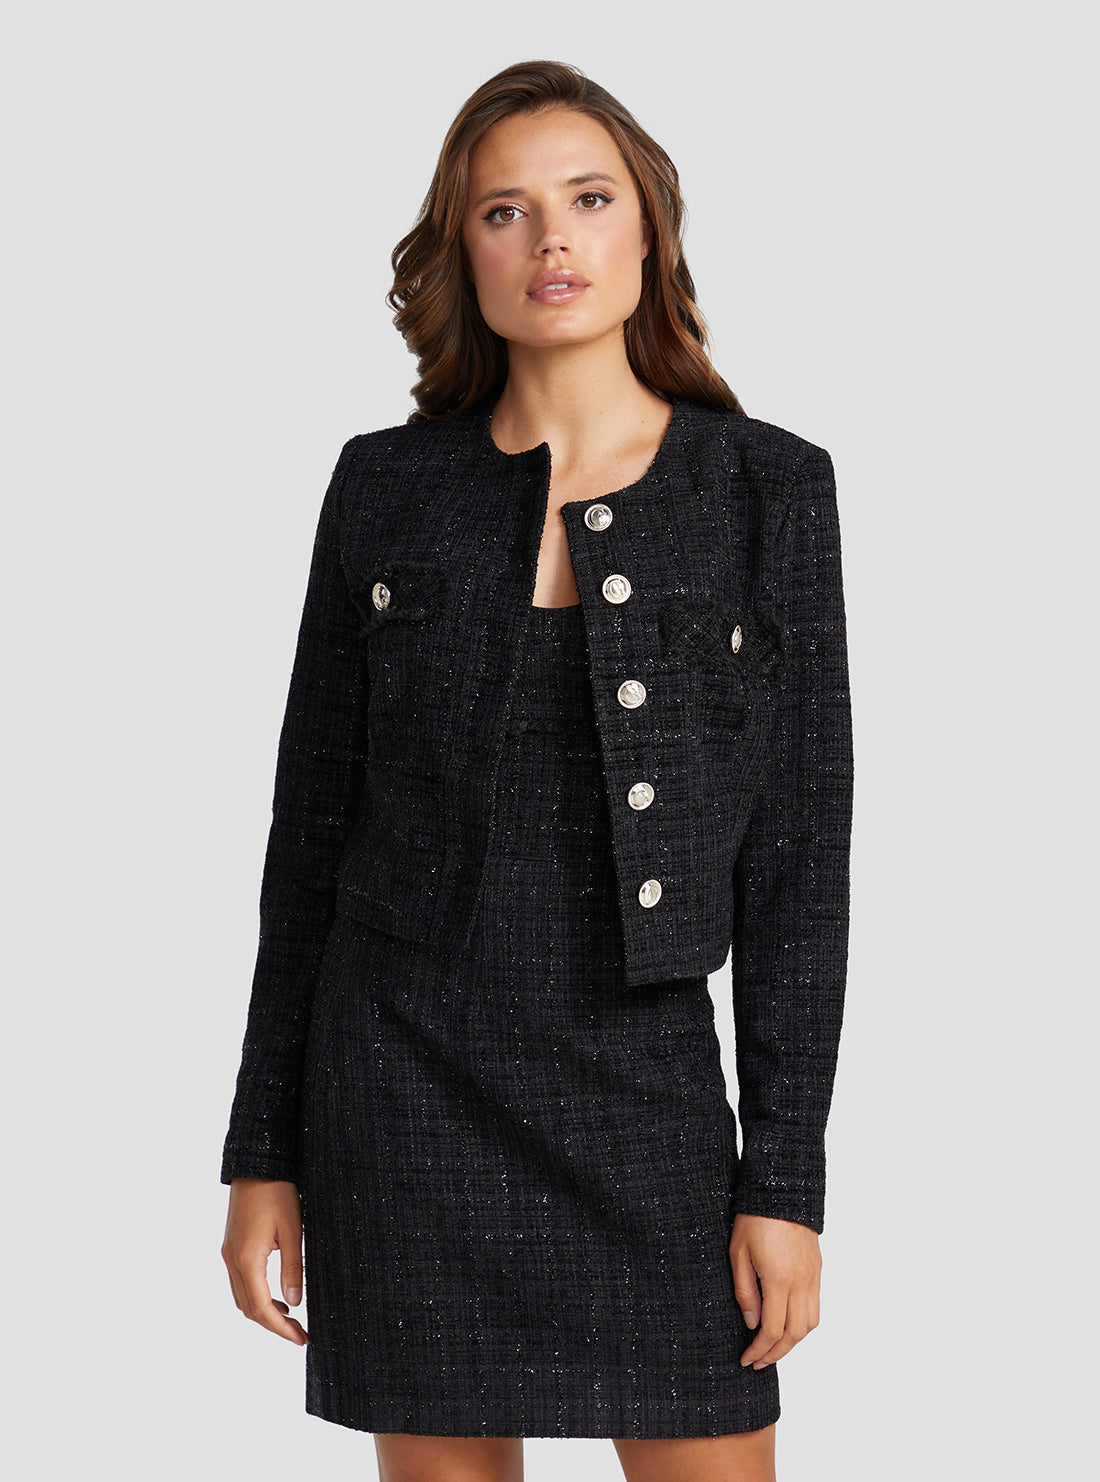 GUESS Women's Black Alara Shimmer Tweed Jacket W3RN50WF5A0 Front View